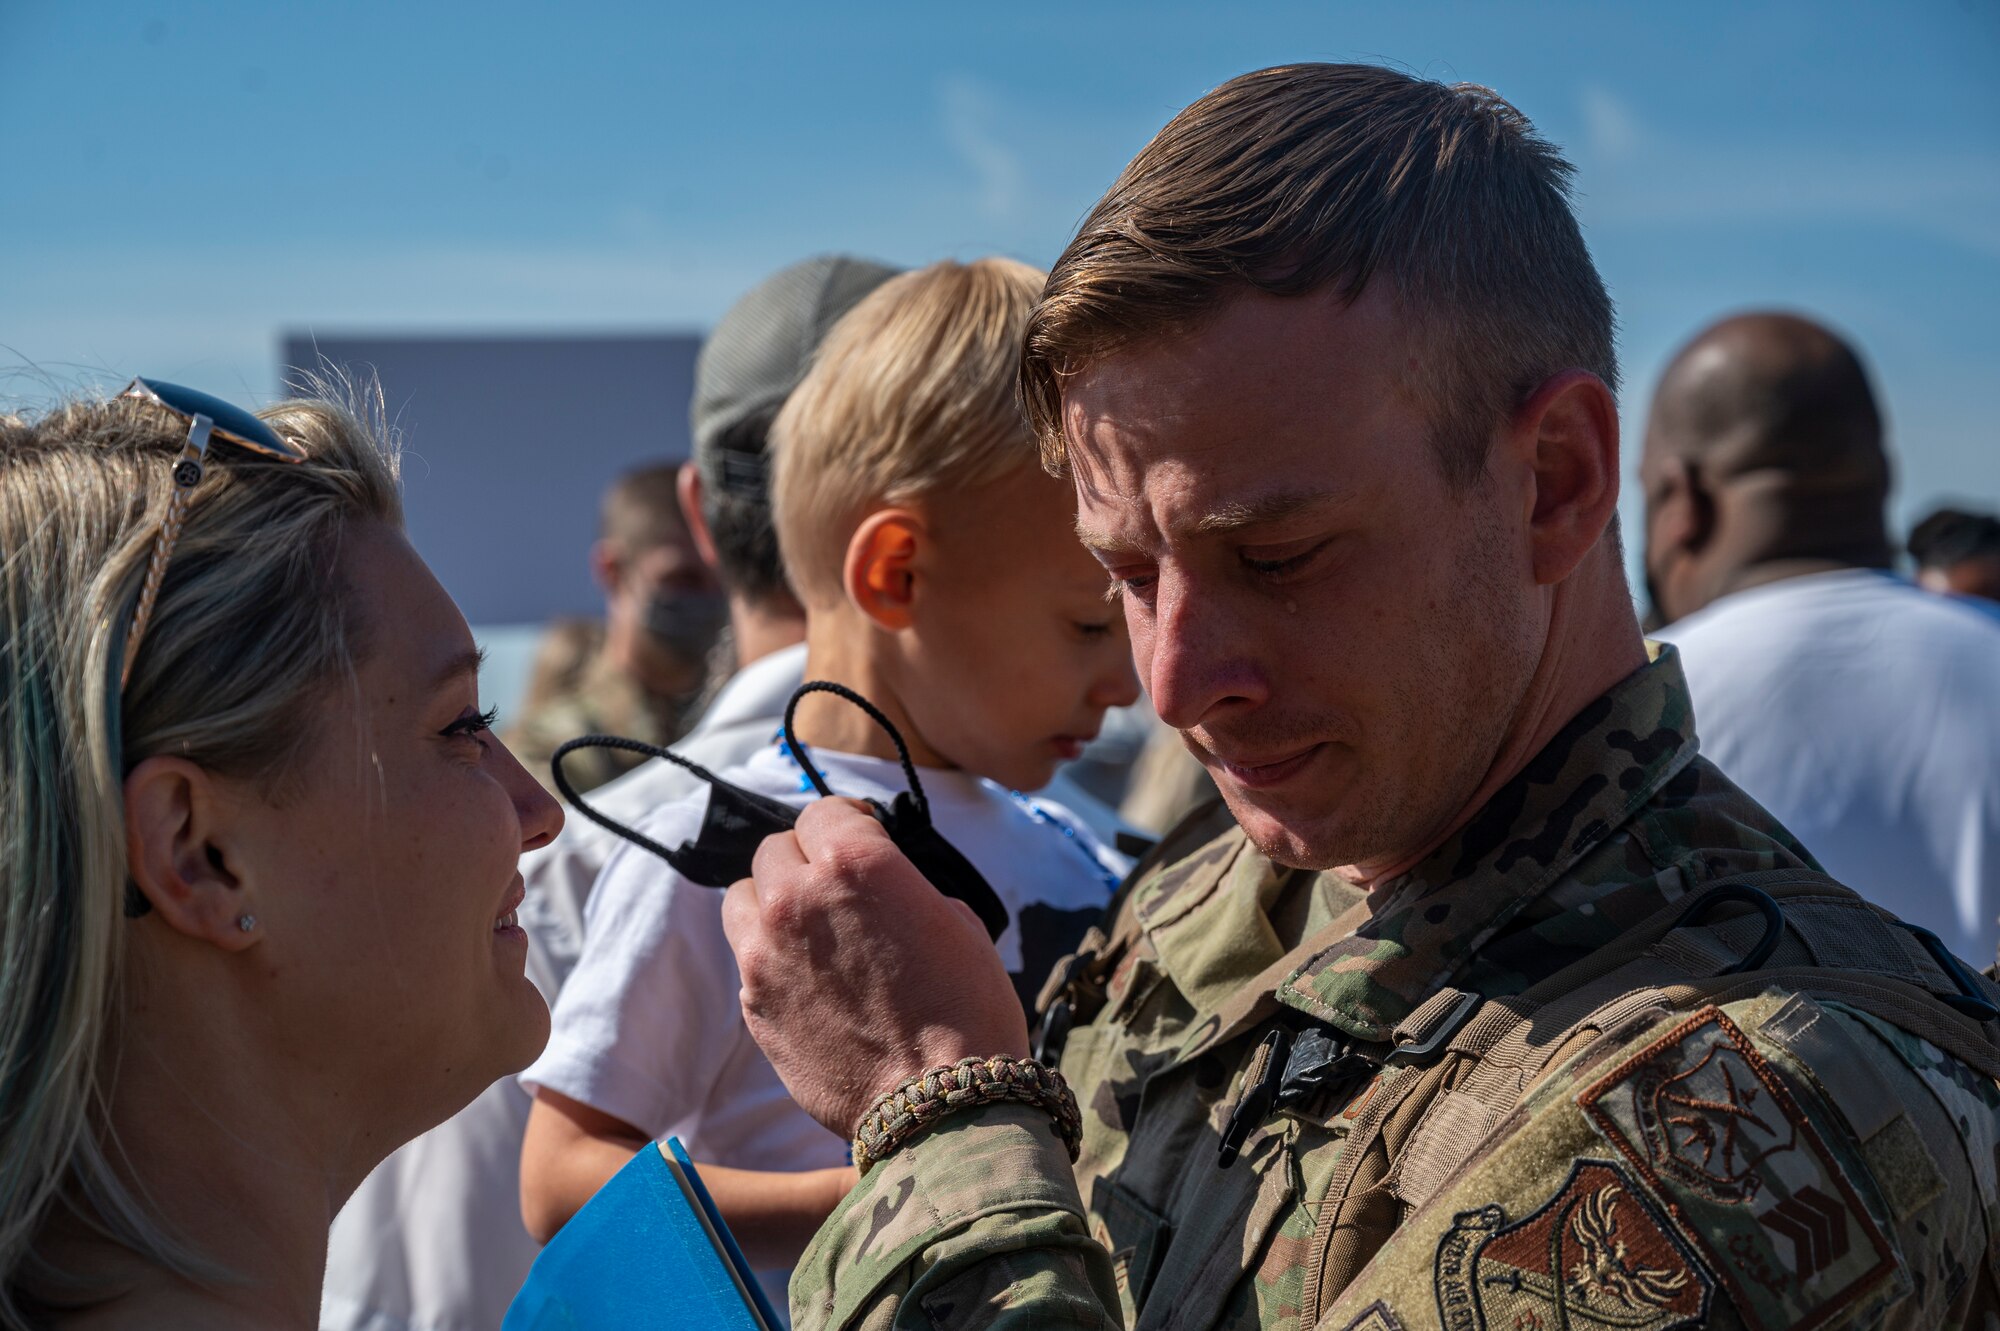 A photo of an Airman reuniting with his family.